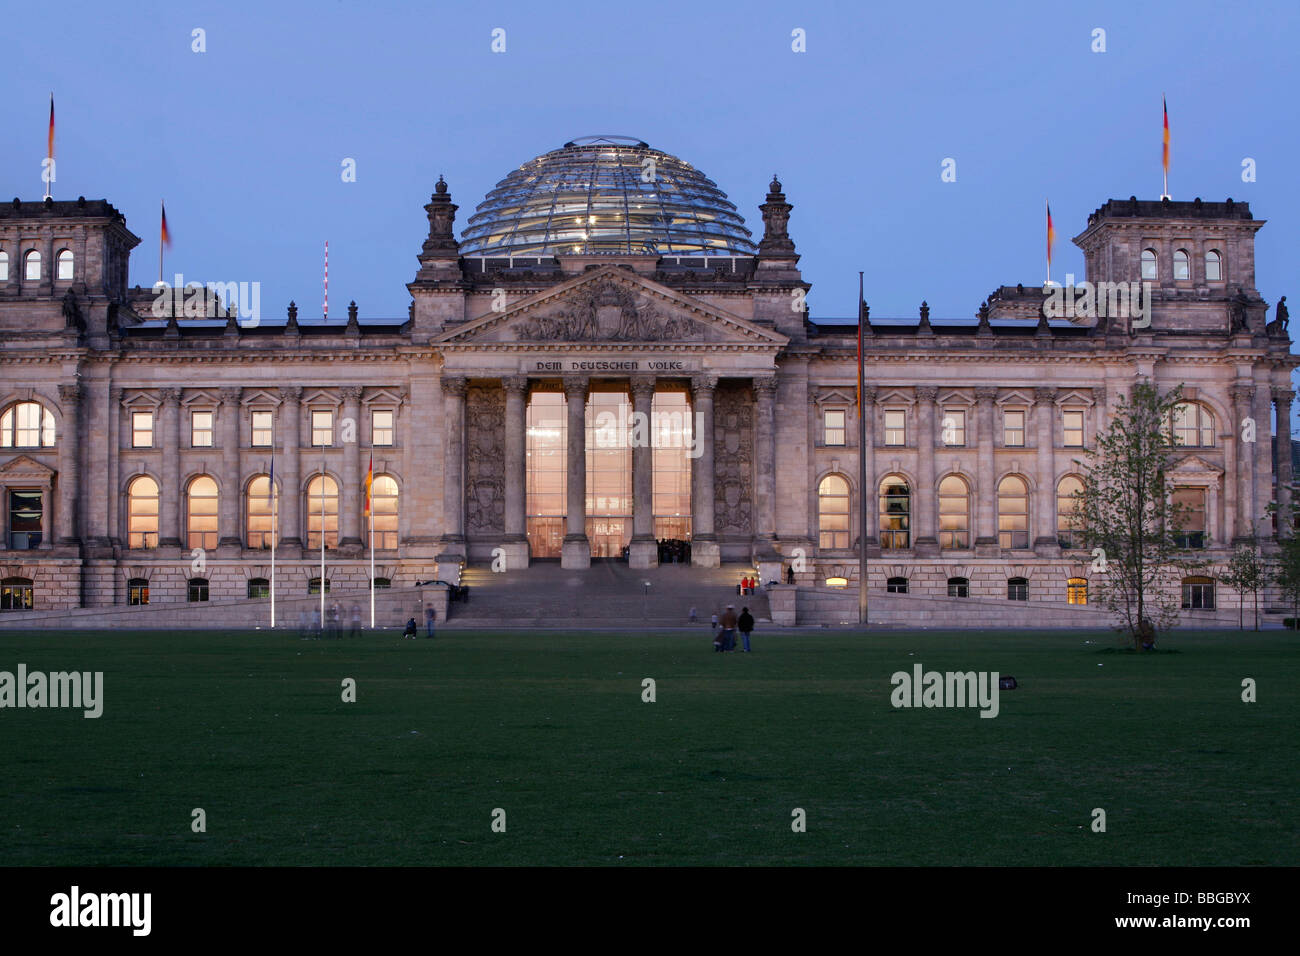 Reichstag parliament building with glass dome and West Portal seen from the large lawn, Platz der Republik square, Berlin, Germ Stock Photo